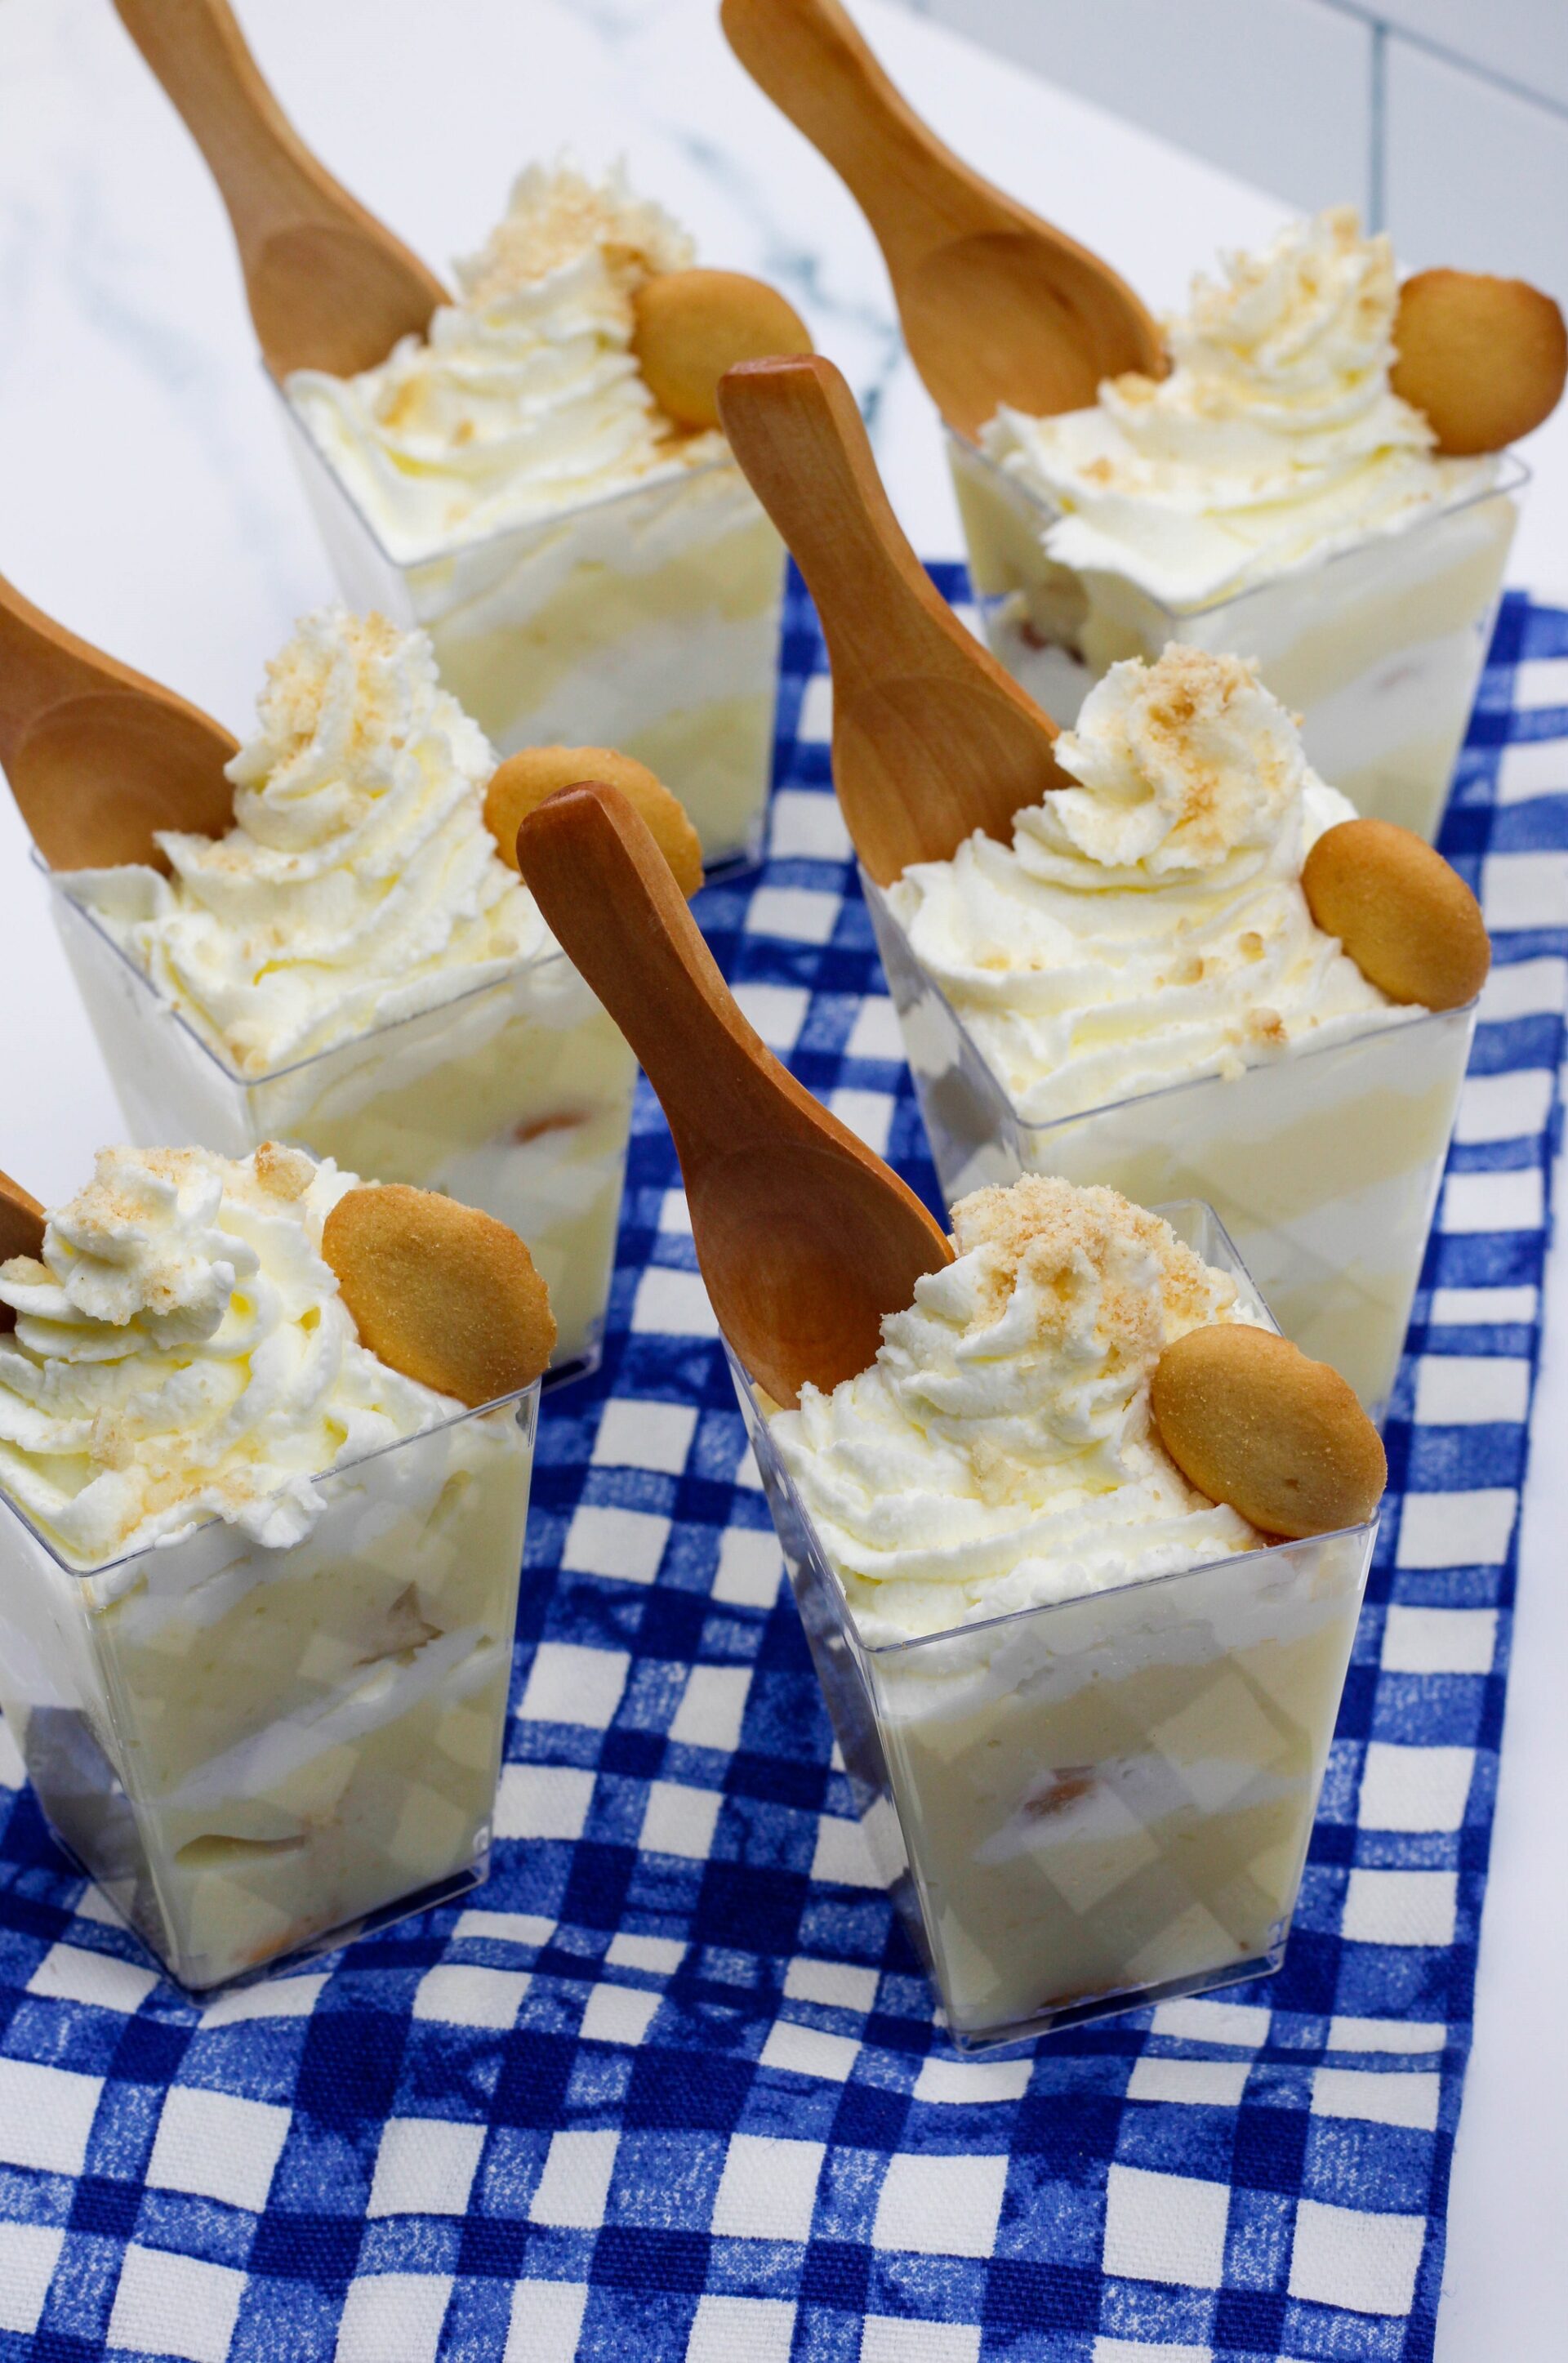 Banana pudding cups on a blue checkered tablecloth.